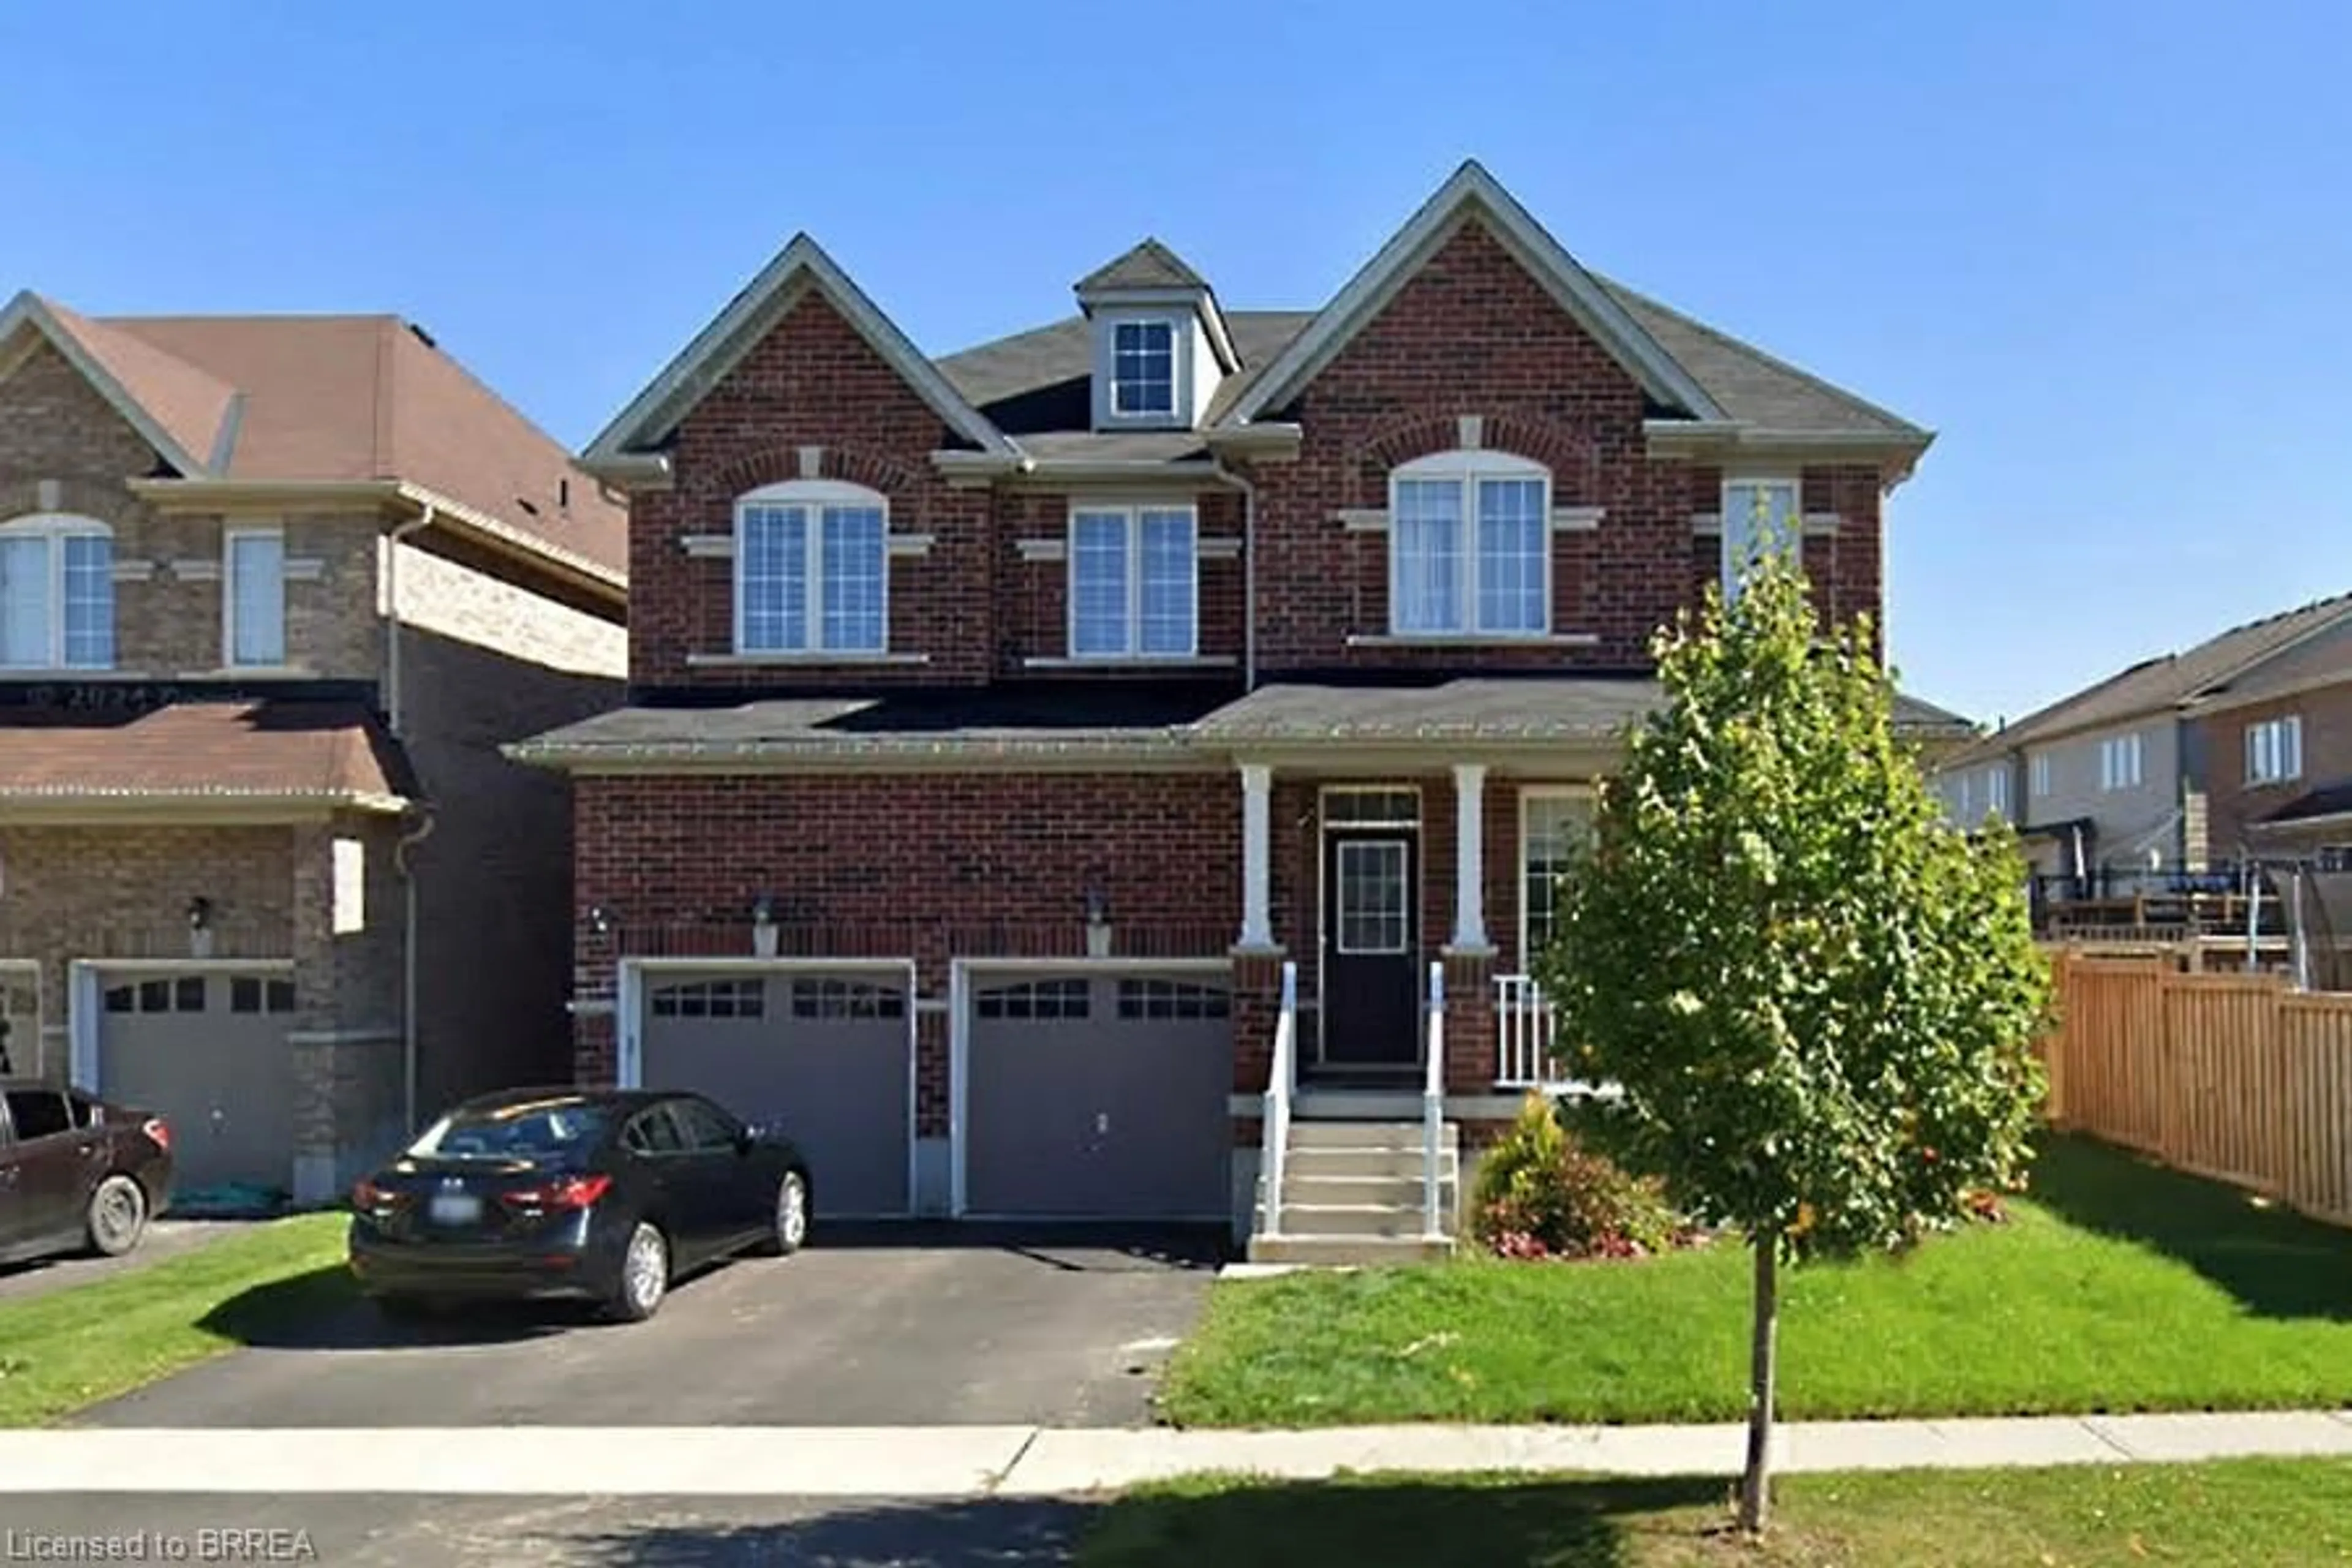 Home with brick exterior material for 61 Cheevers Rd, Brantford Ontario N3T 0K3